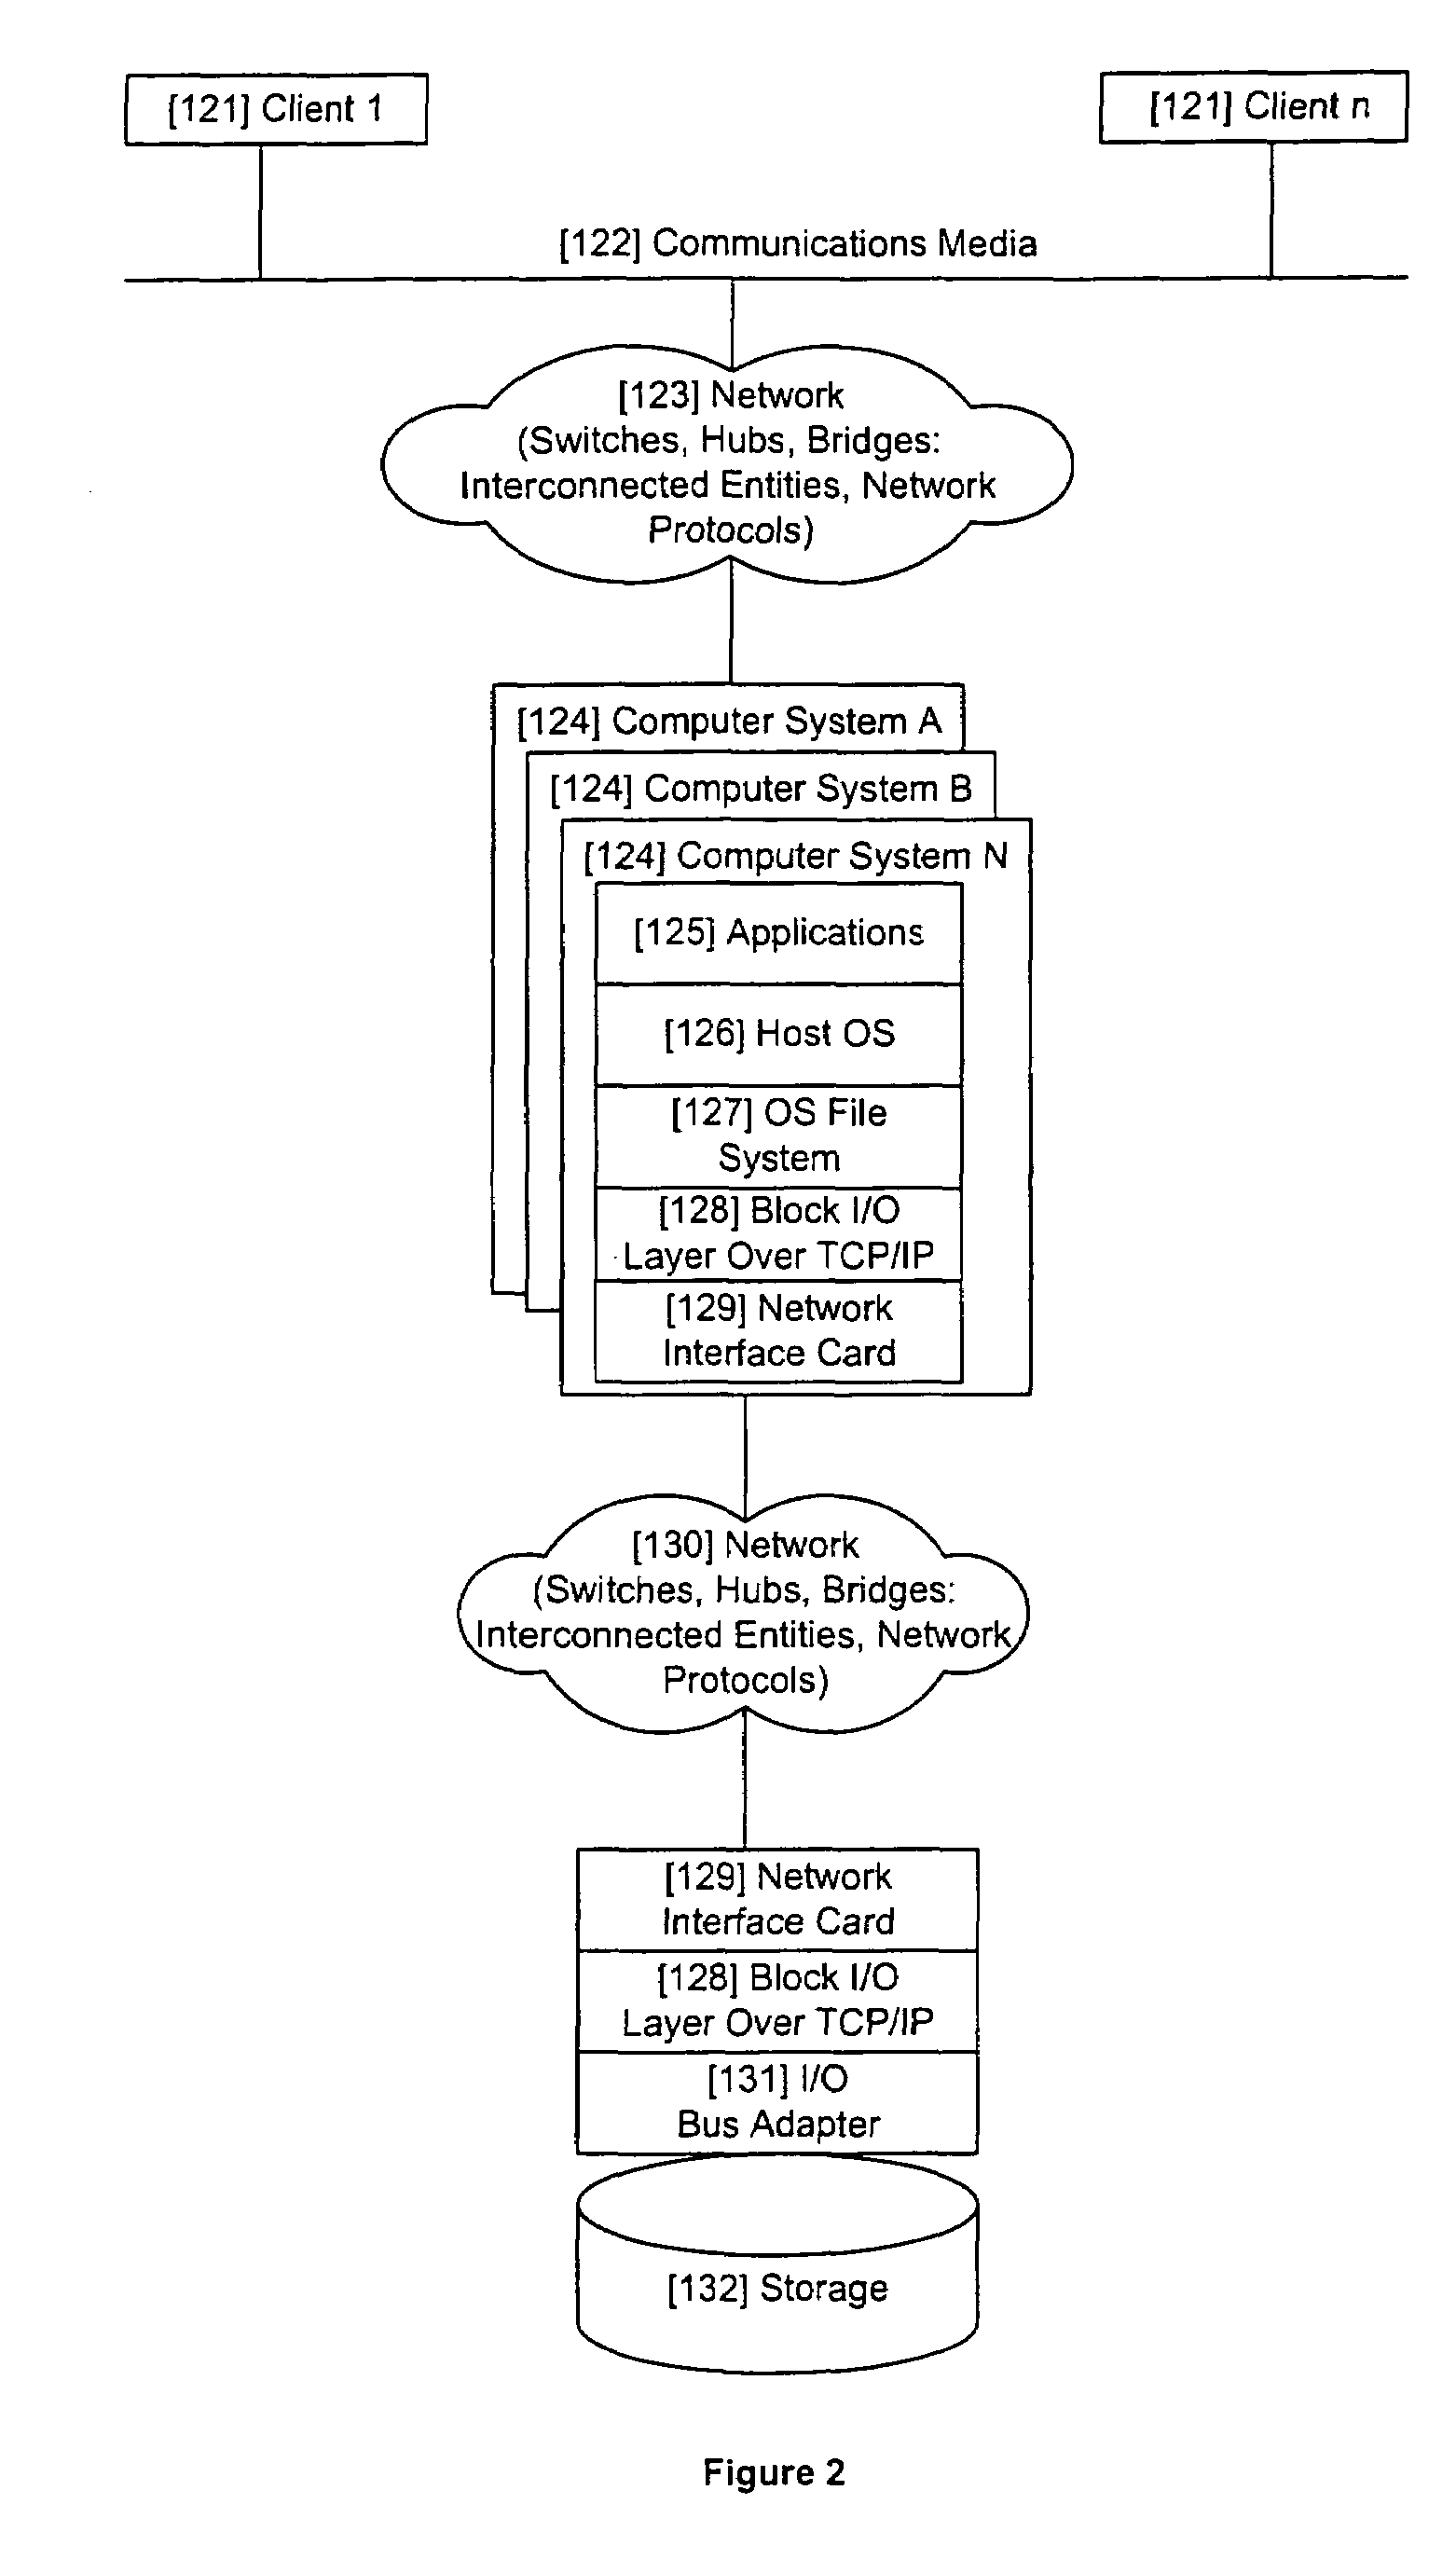 Method and apparatus for improving update performance of non-uniform access time persistent storage media